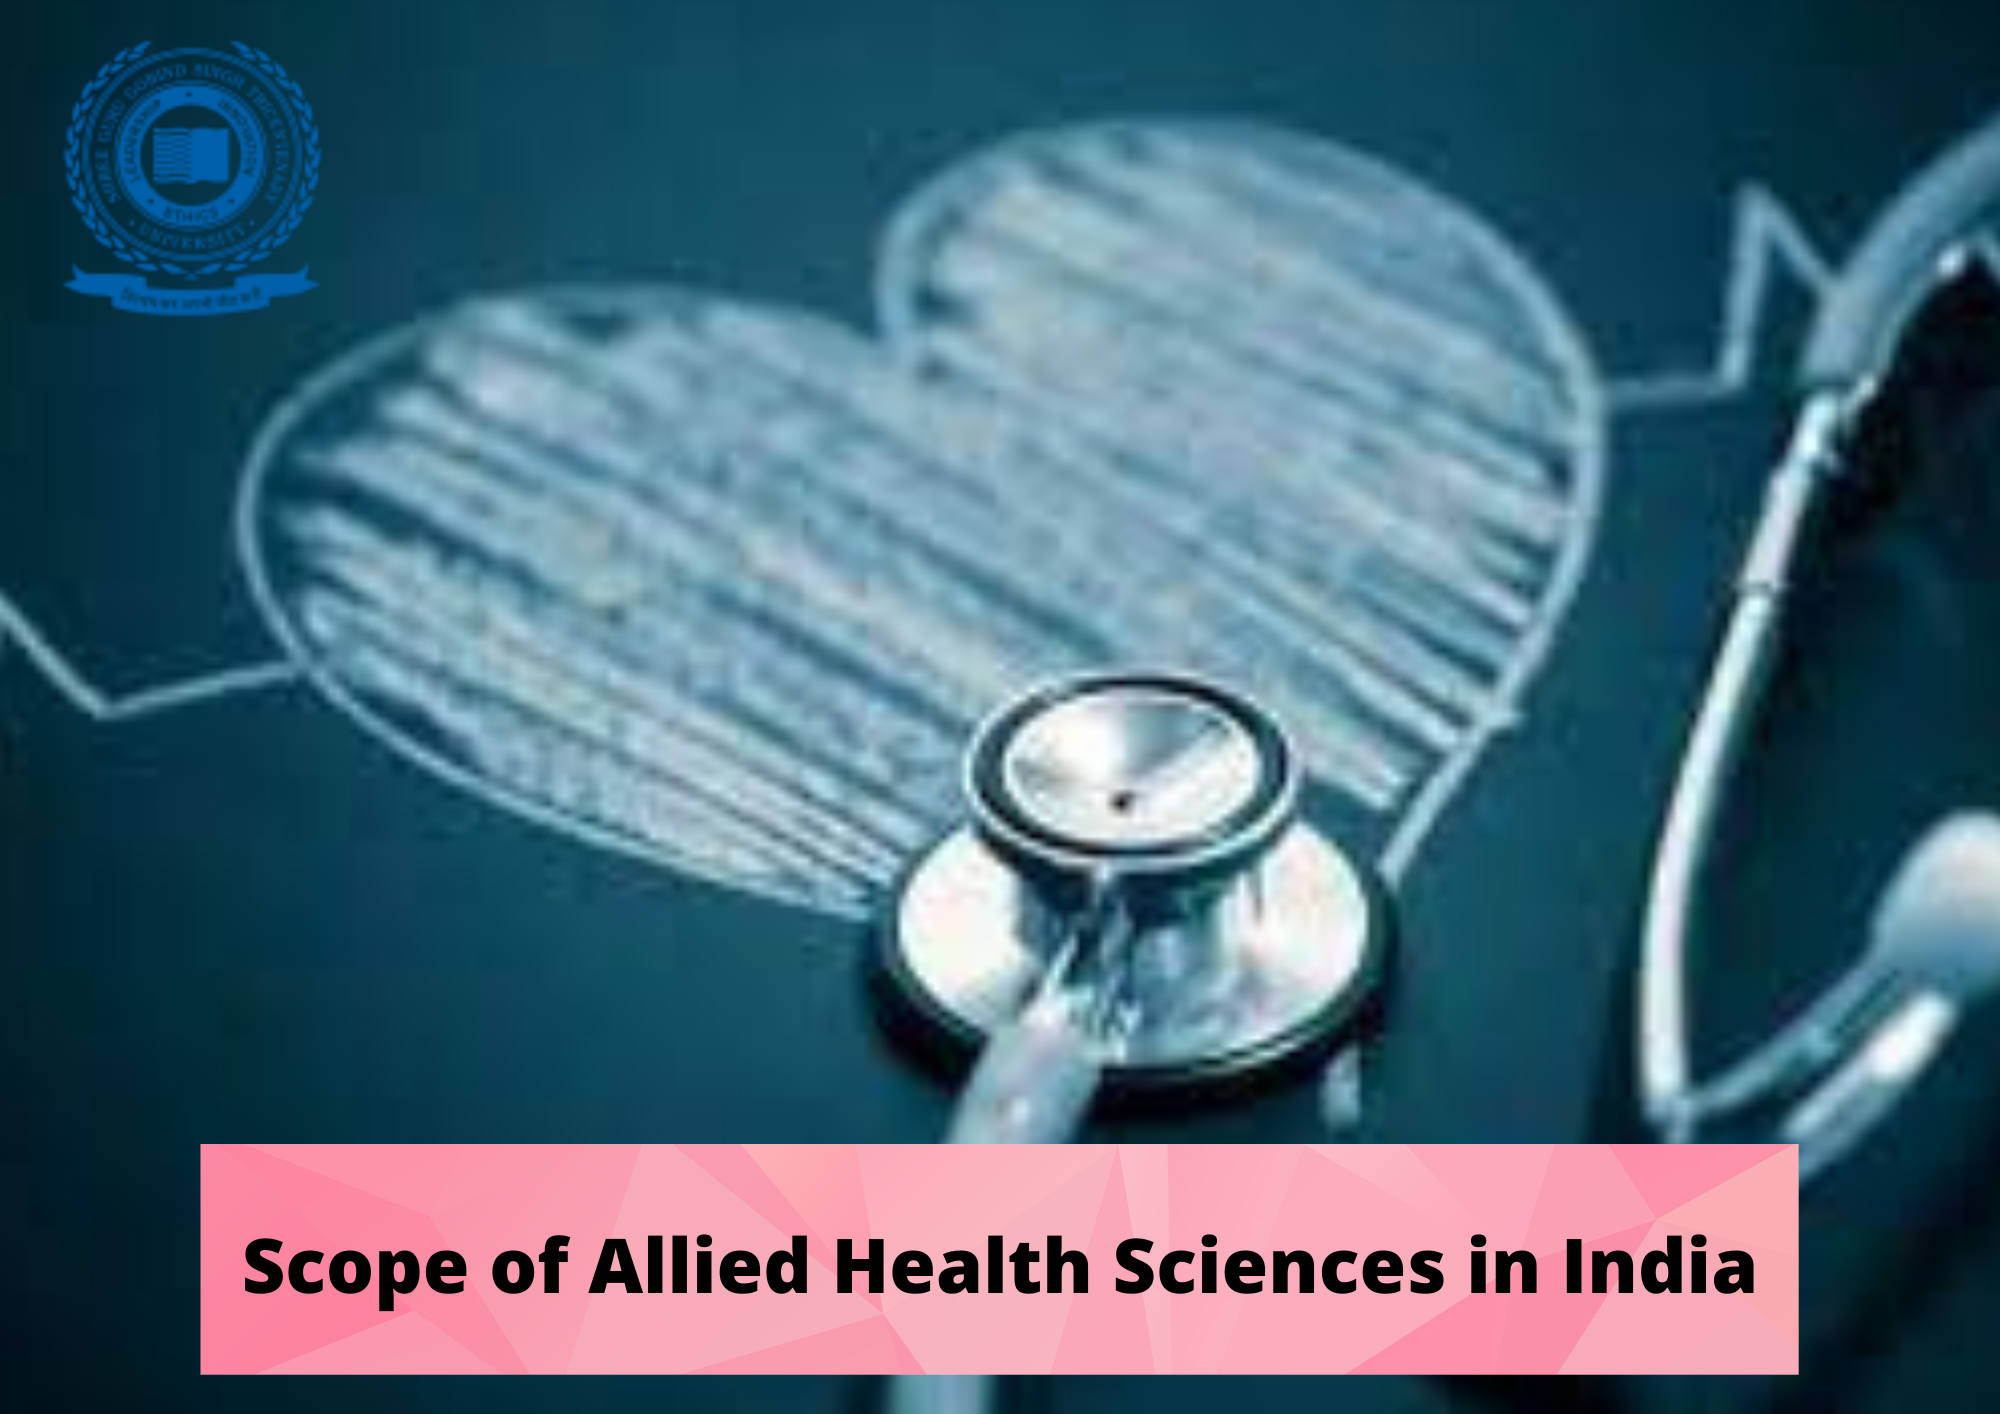 Scope of Allied Health Sciences in India